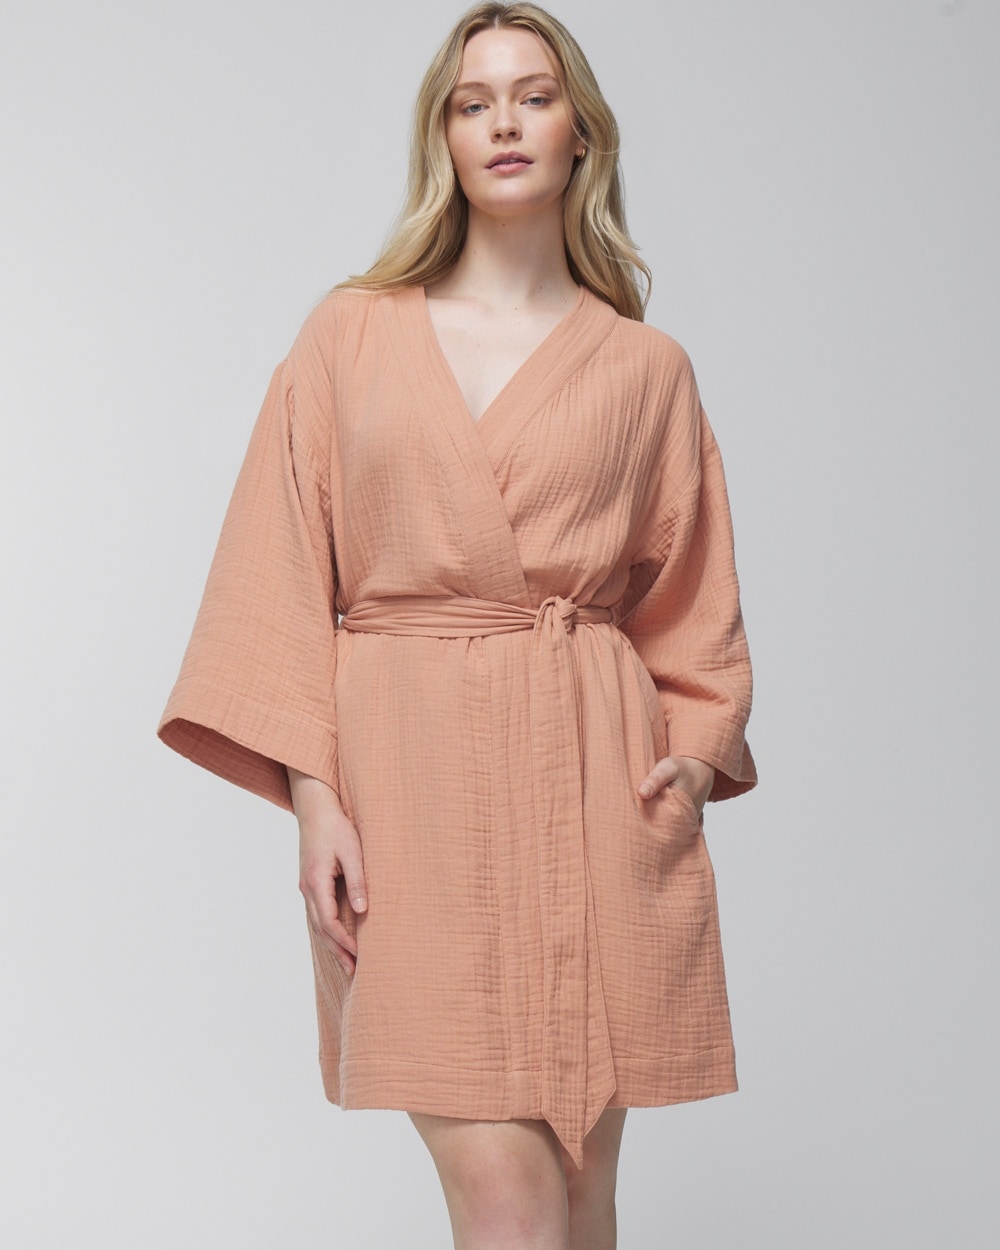 Soma Women's Textured Cotton Robe In Nude Size 2xl |